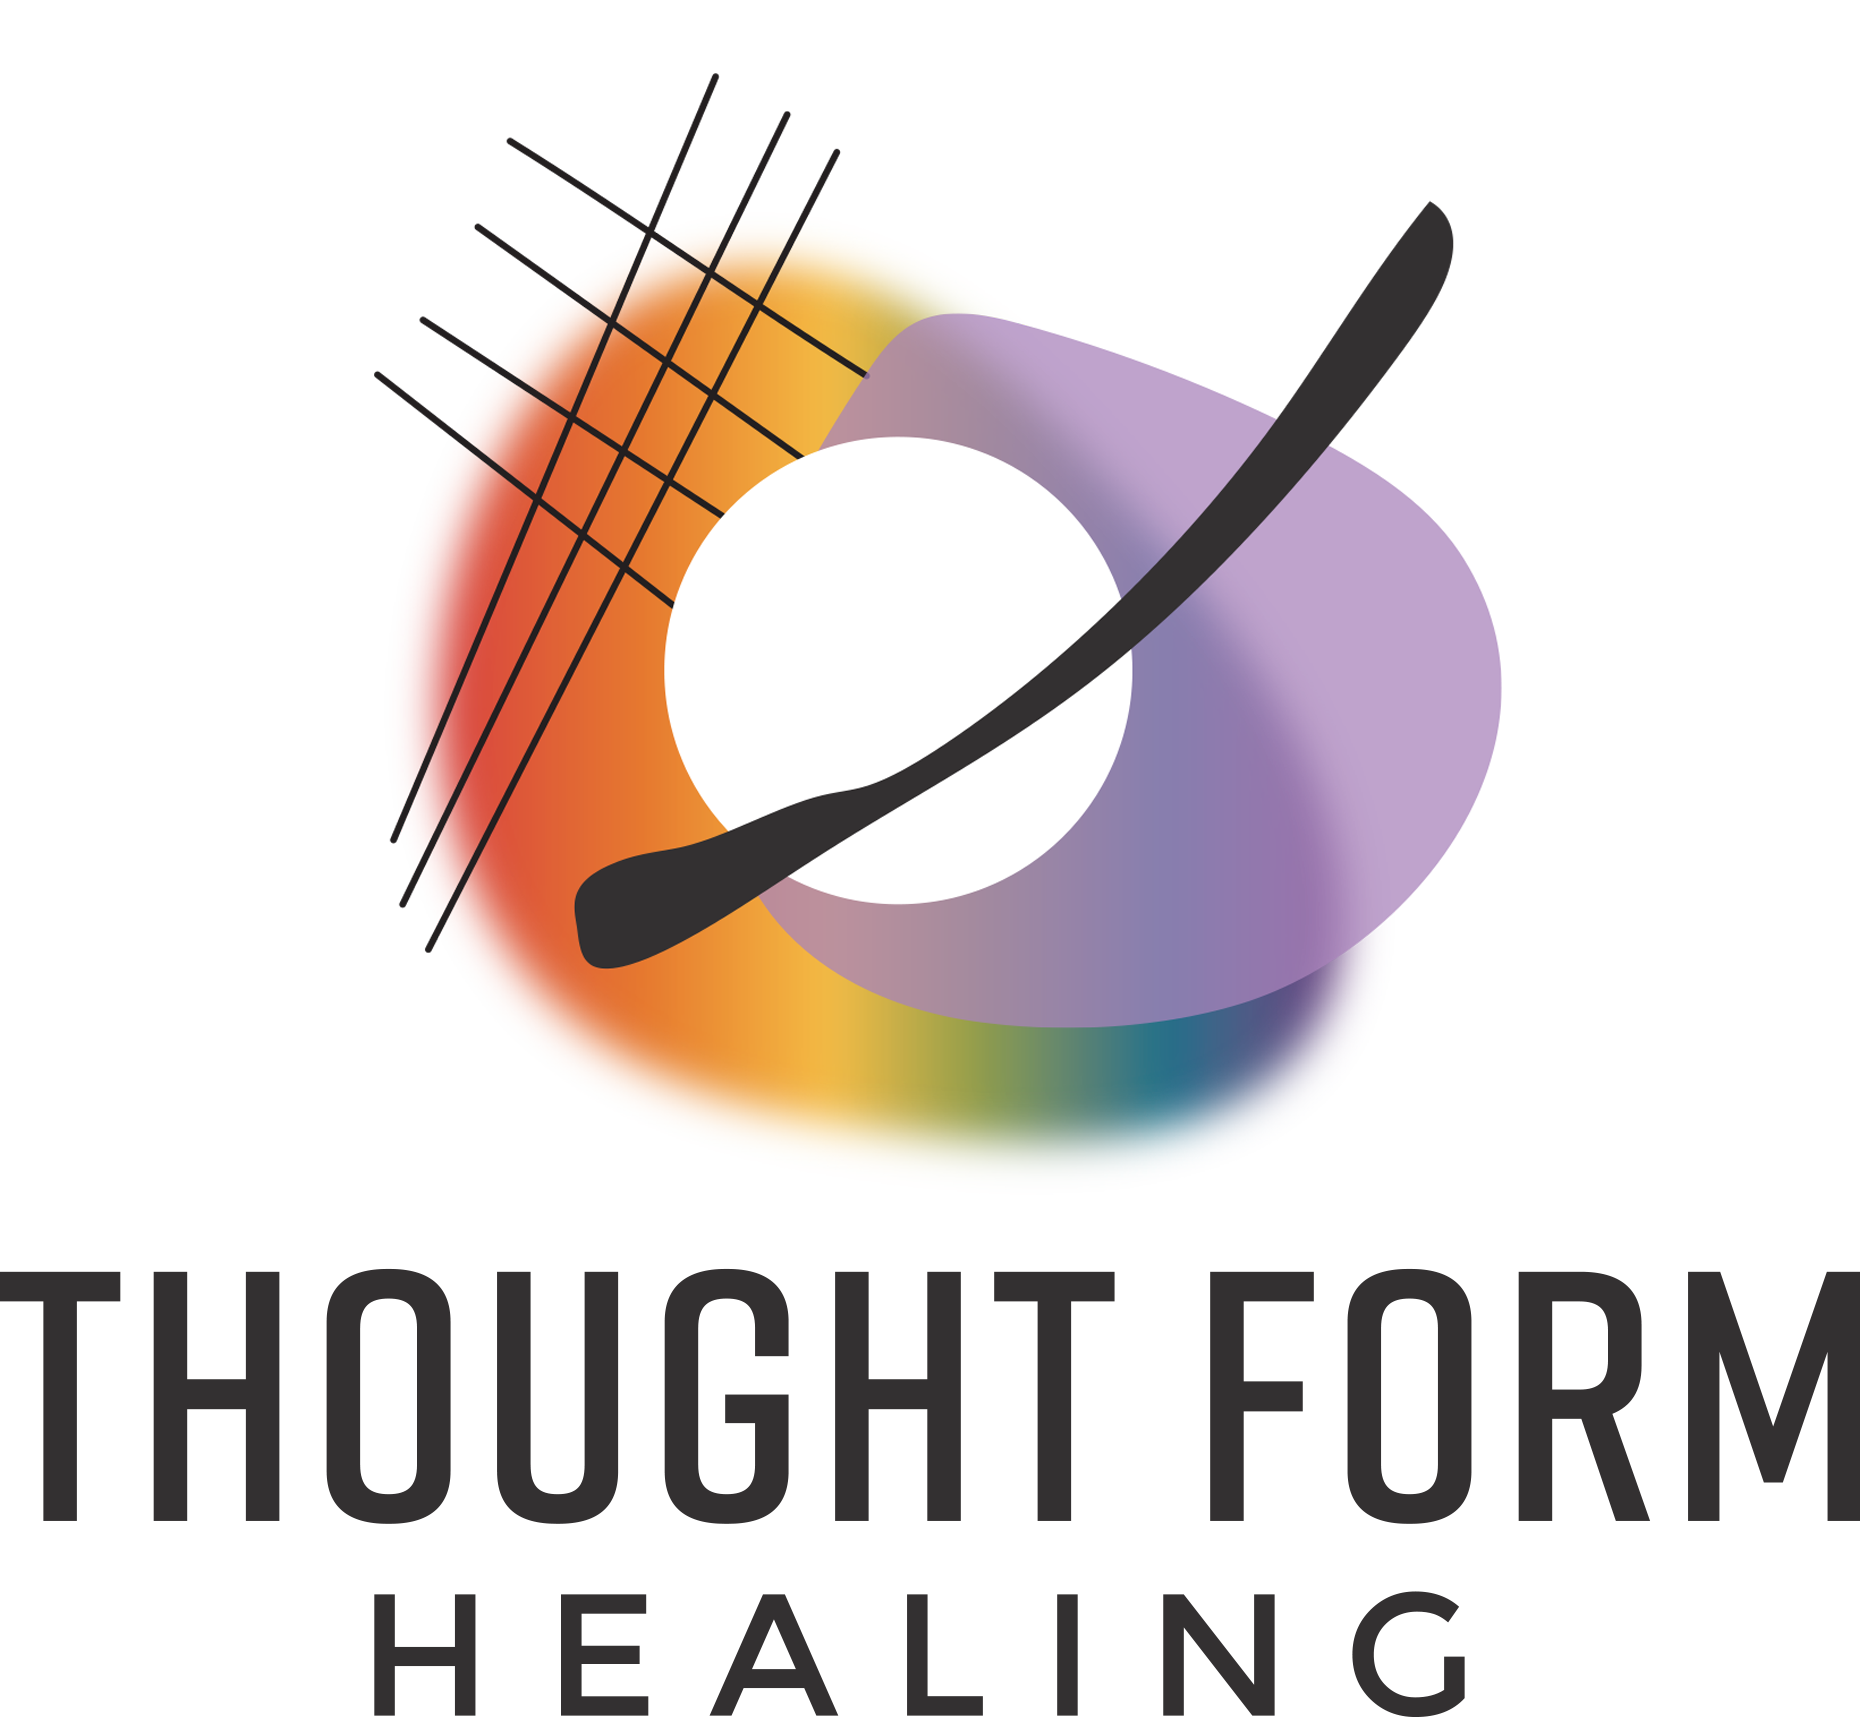 Thought Form Healing